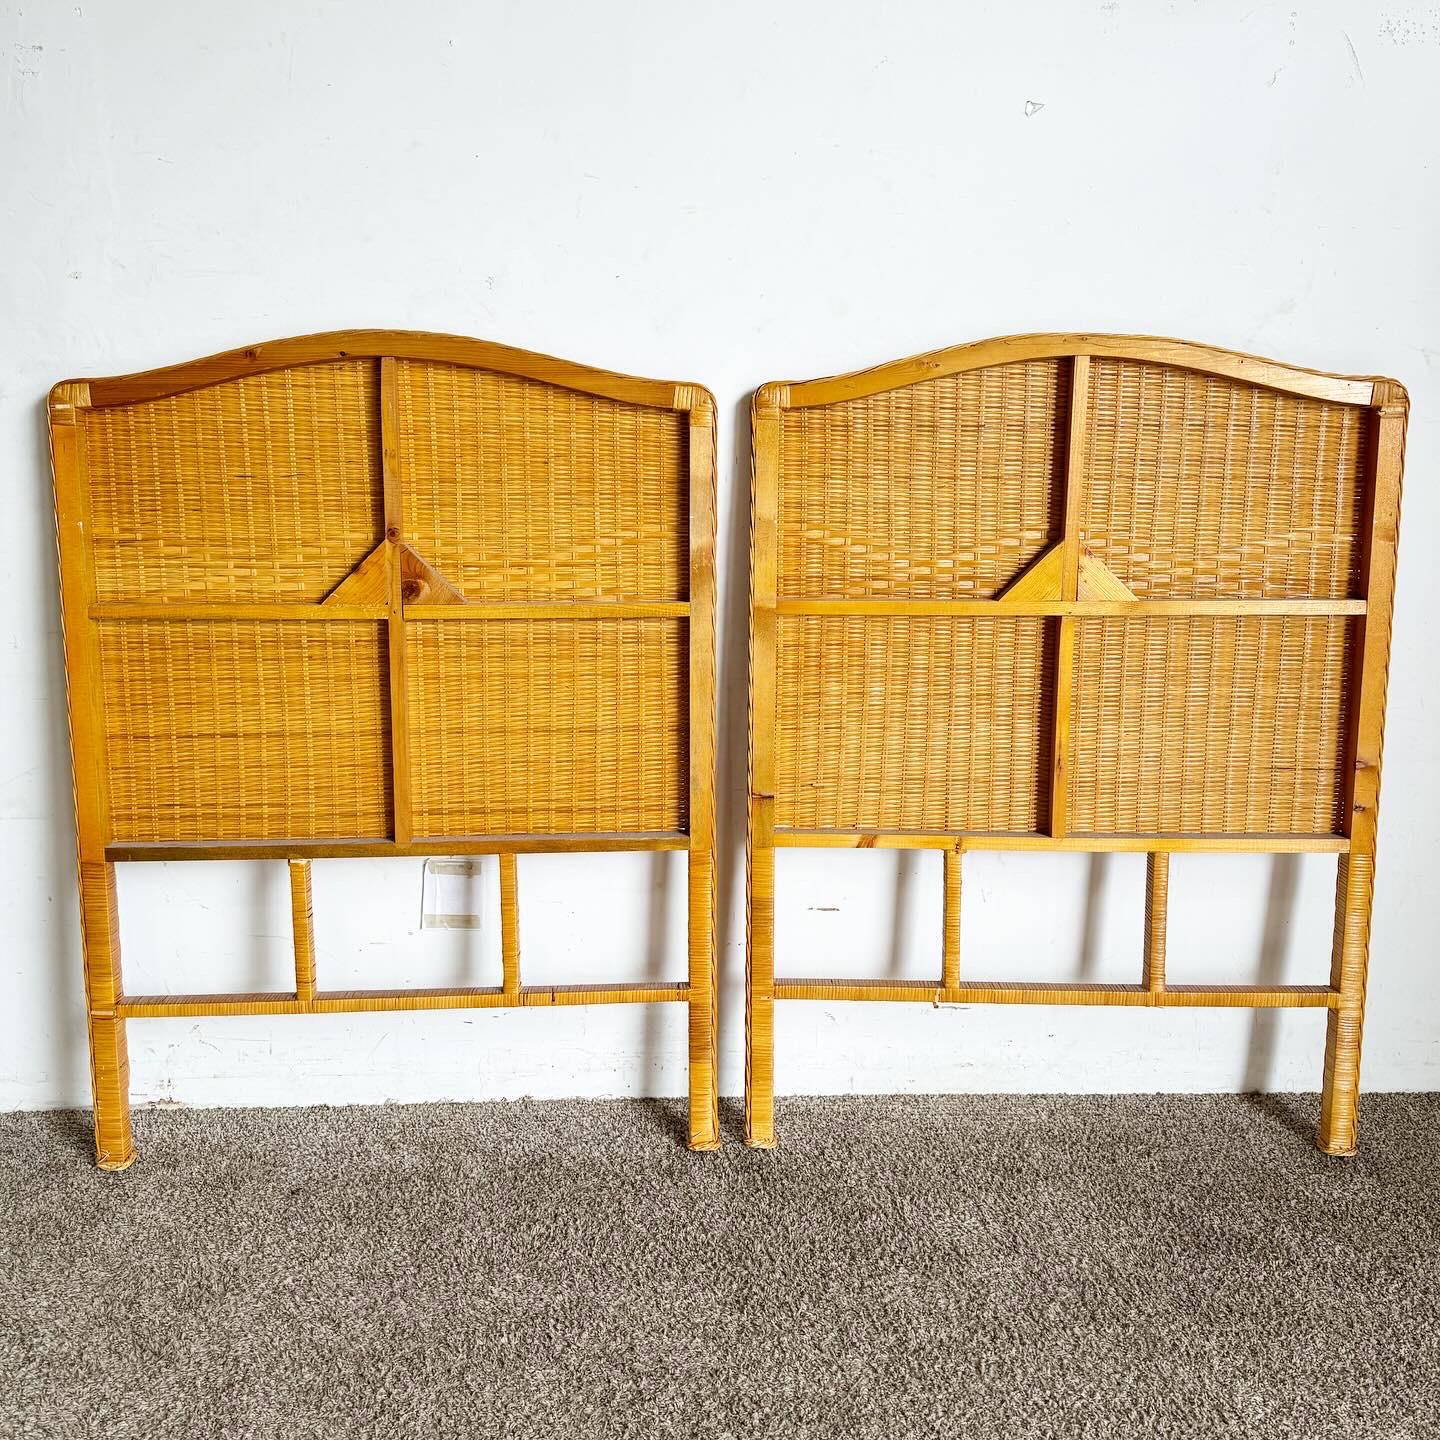 20th Century Boho Chic Wicker Rattan Twin Headboards - a Pair For Sale